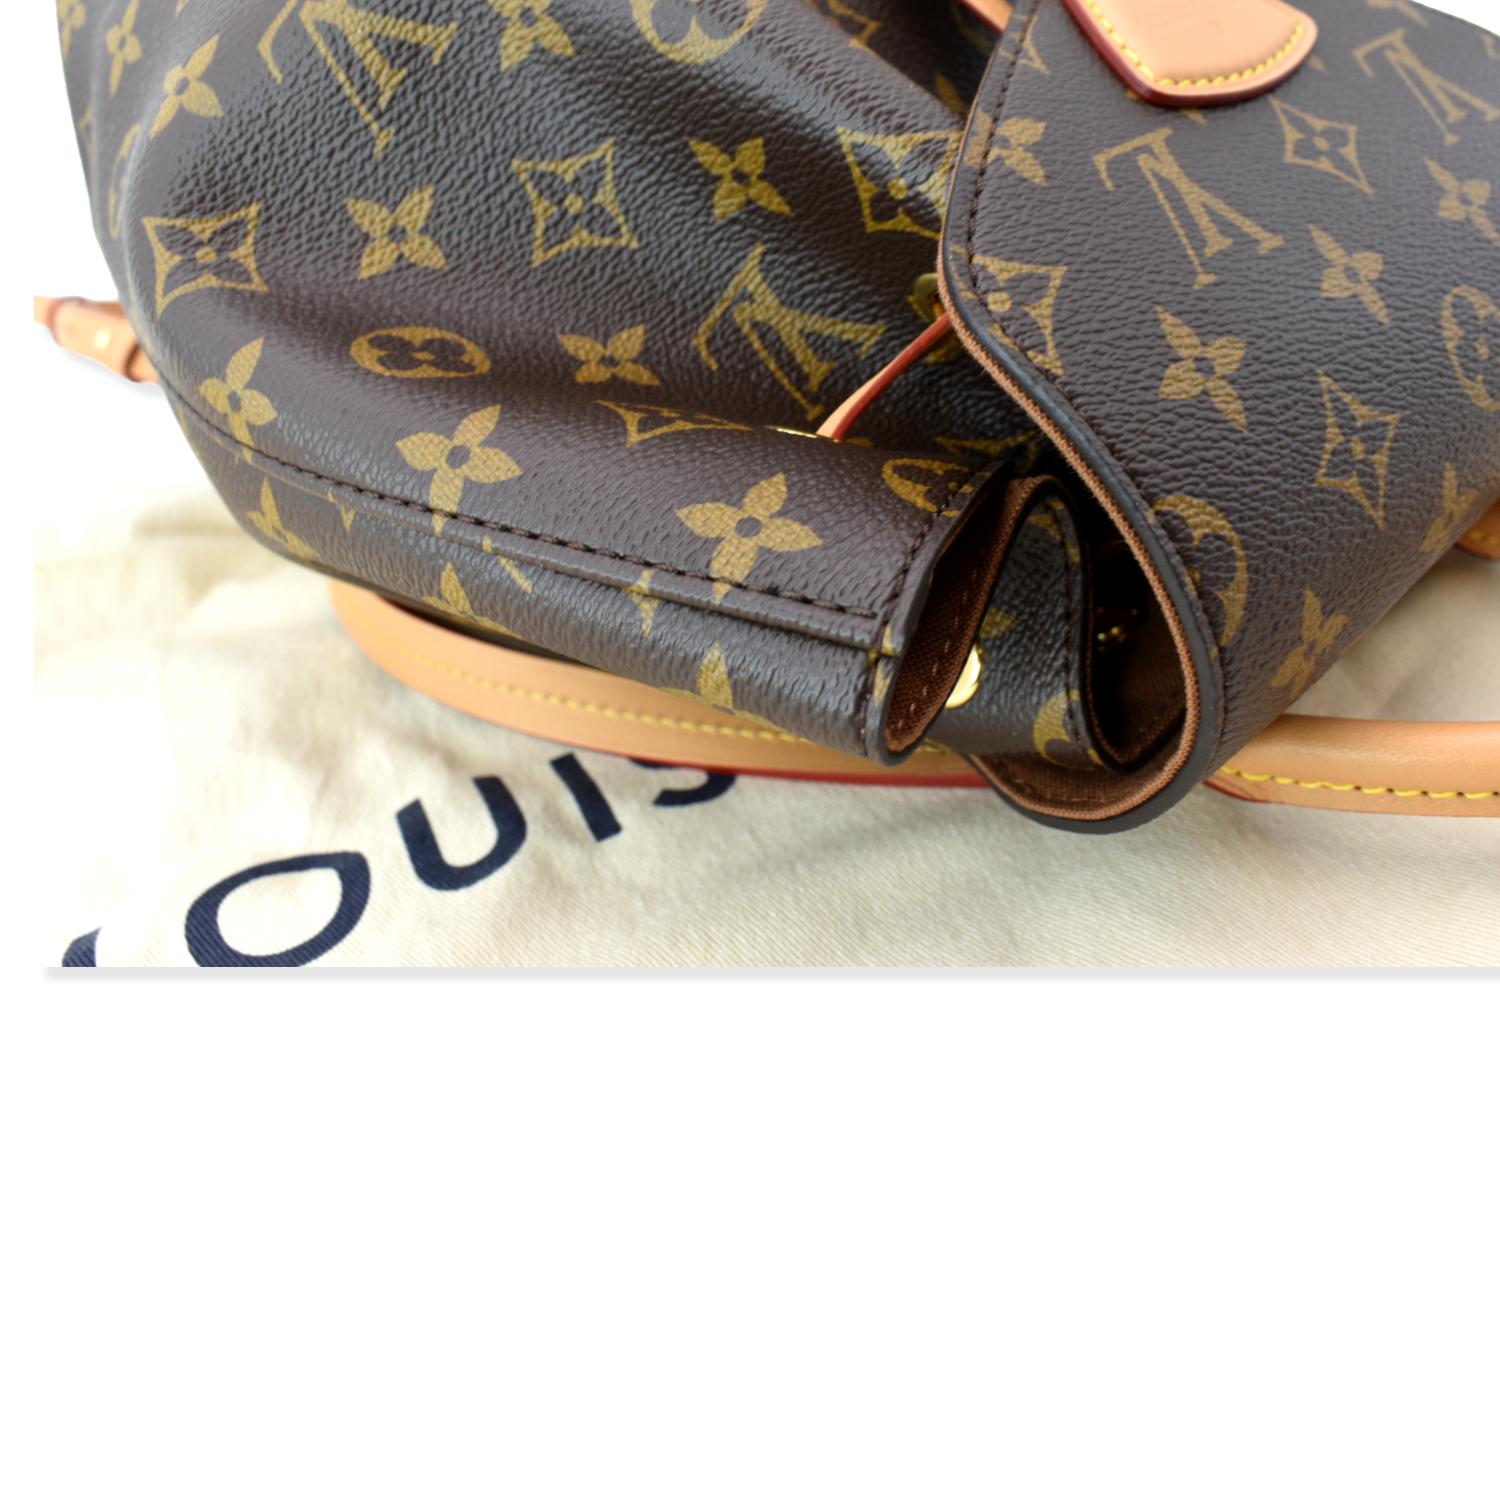 Louis Vuitton Vintage - Monogram Montsouris PM - Brown - Canvas and  Vachetta Leather Backpack - Luxury High Quality - Avvenice